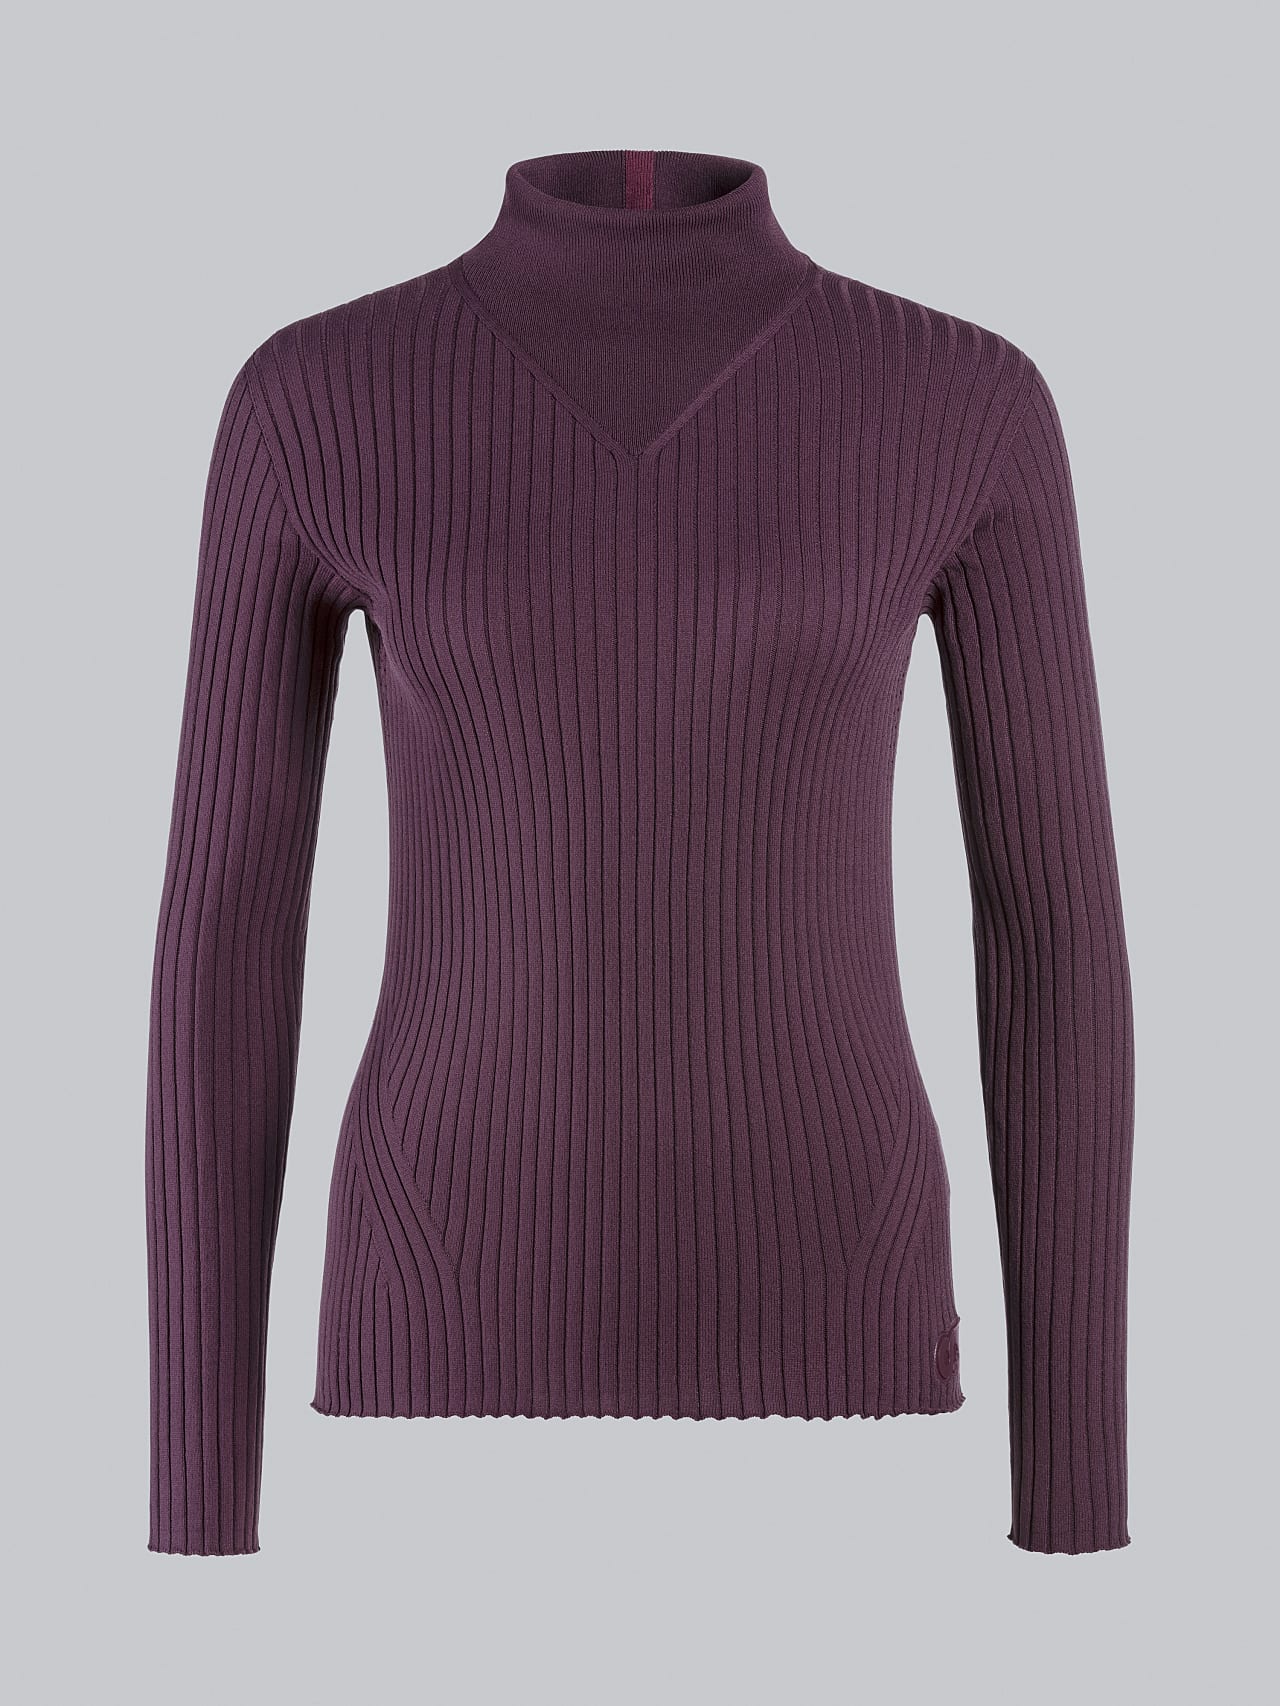 AlphaTauri | FAXEE V1.Y5.02 | Seamless 3D Knit Mock-Neck Jumper in Burgundy for Women